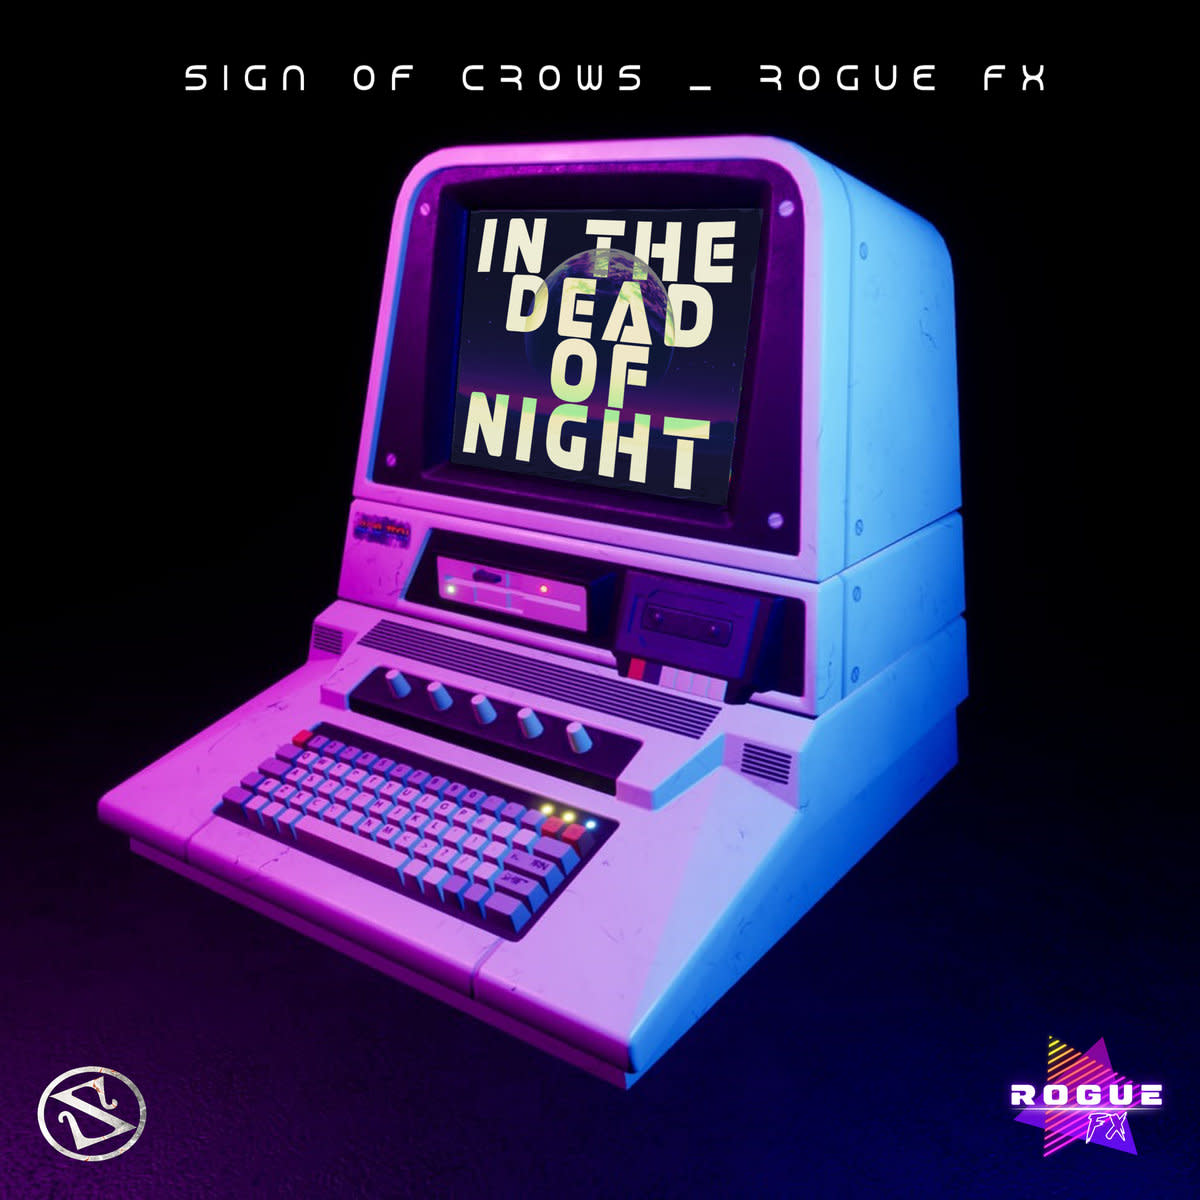 Synth Single Review: “In The Dead Of Night” by Rogue FX & Sign Of Crows